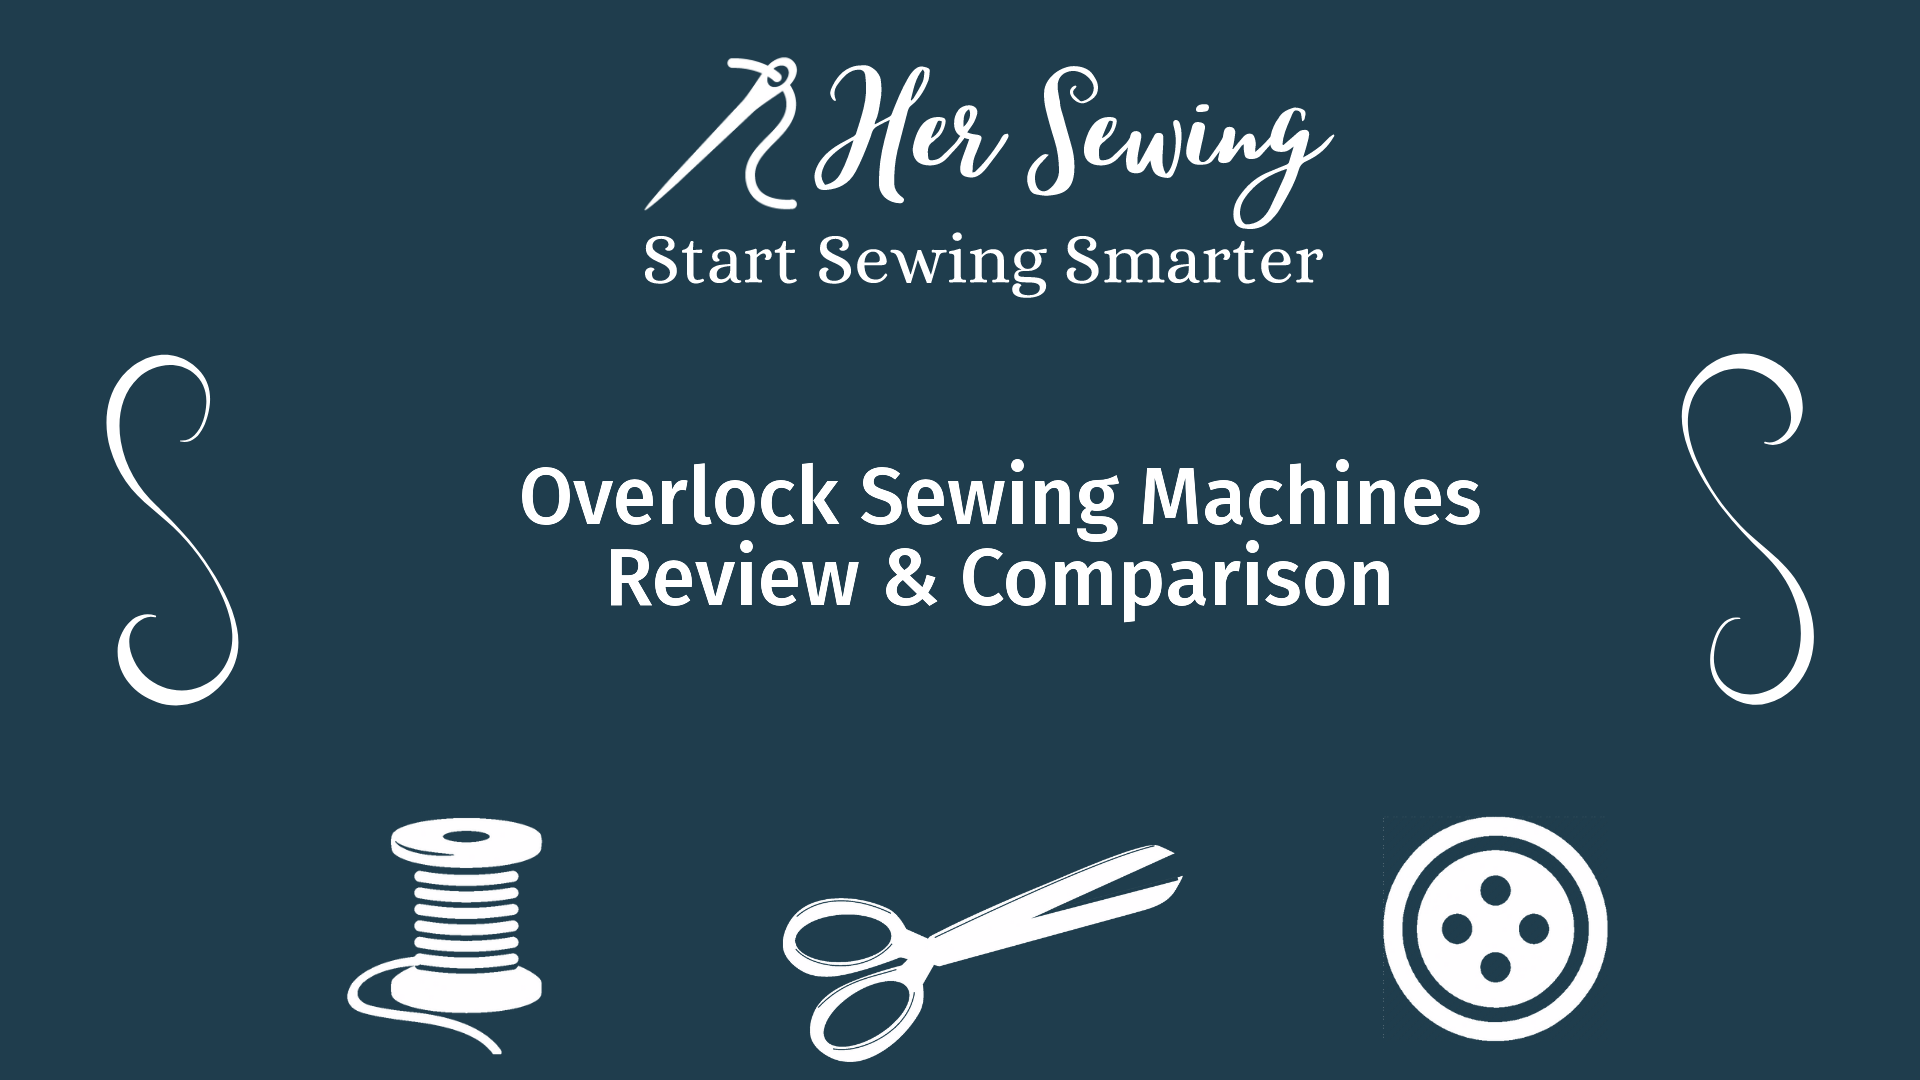 Overlock Sewing Machines Review & Comparison